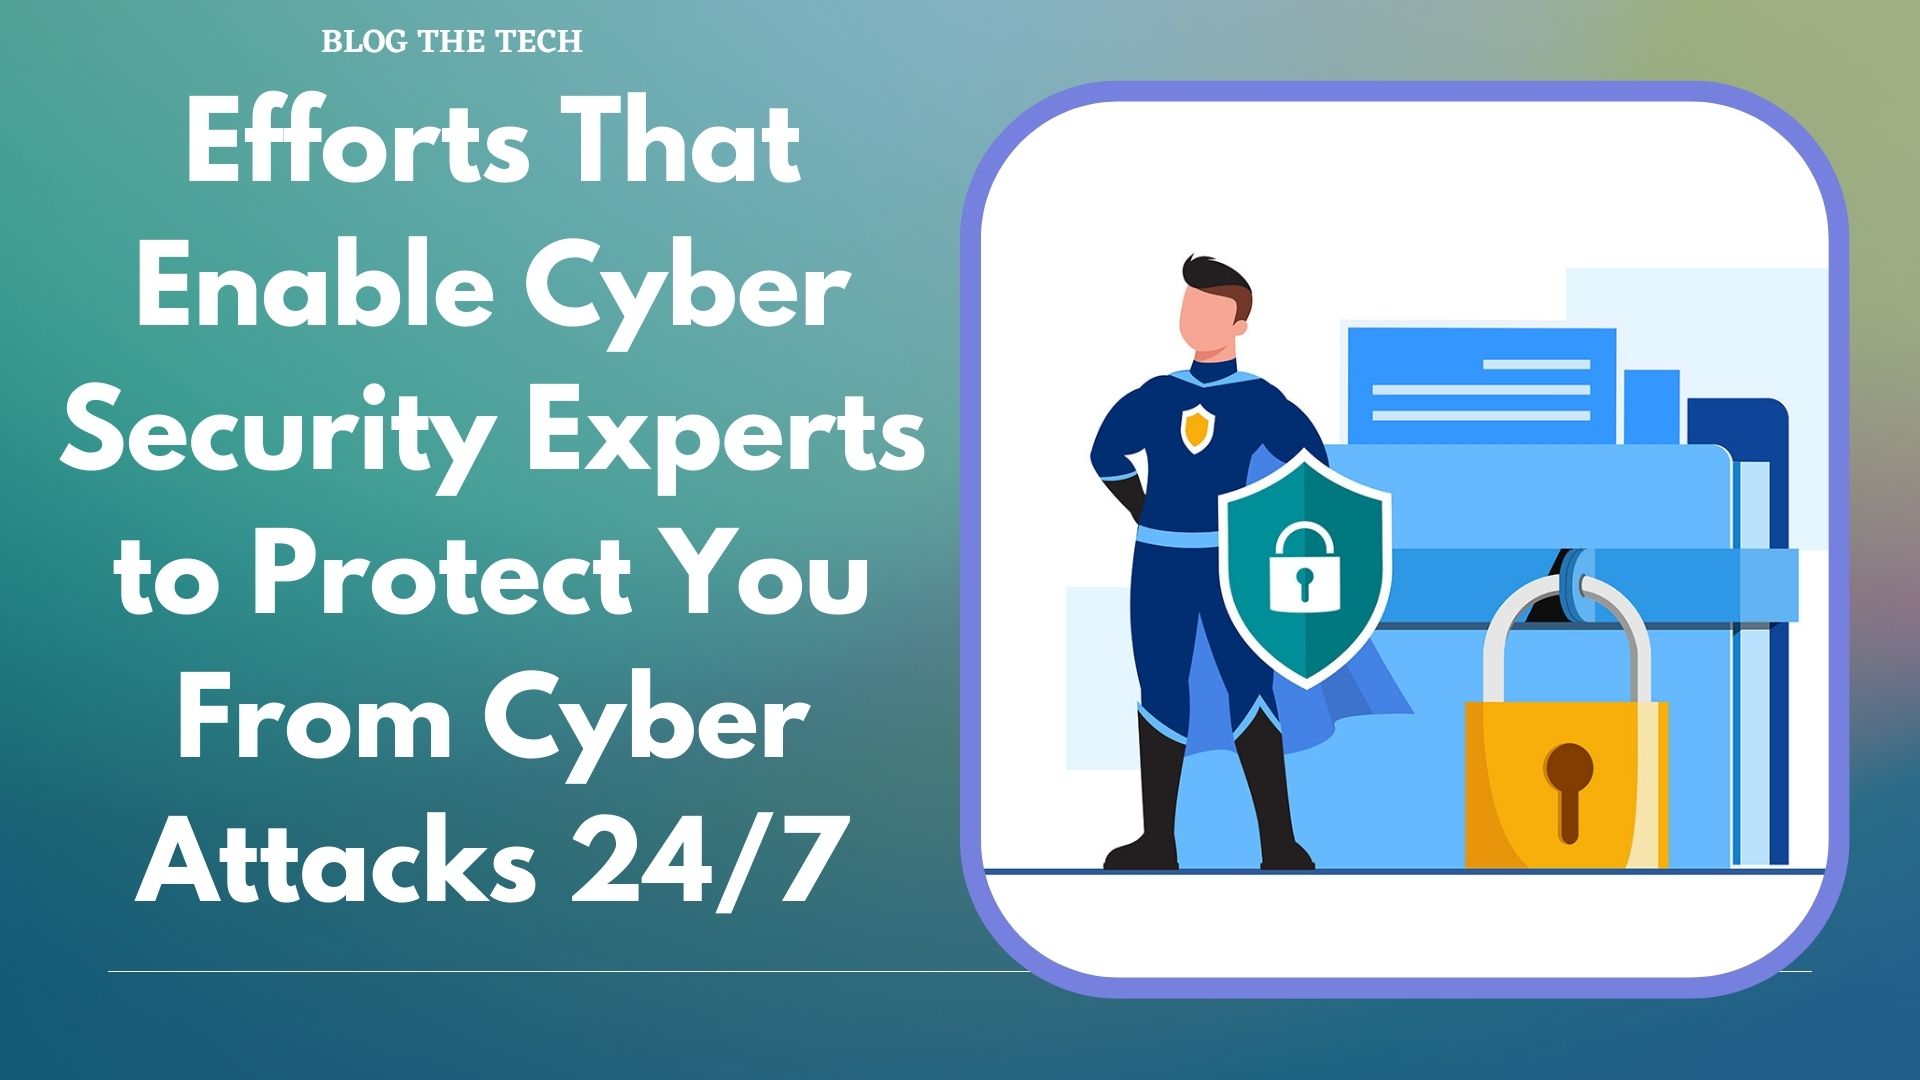 Efforts That Enable Cyber Security Experts to Protect You From Cyber Attacks 24/7